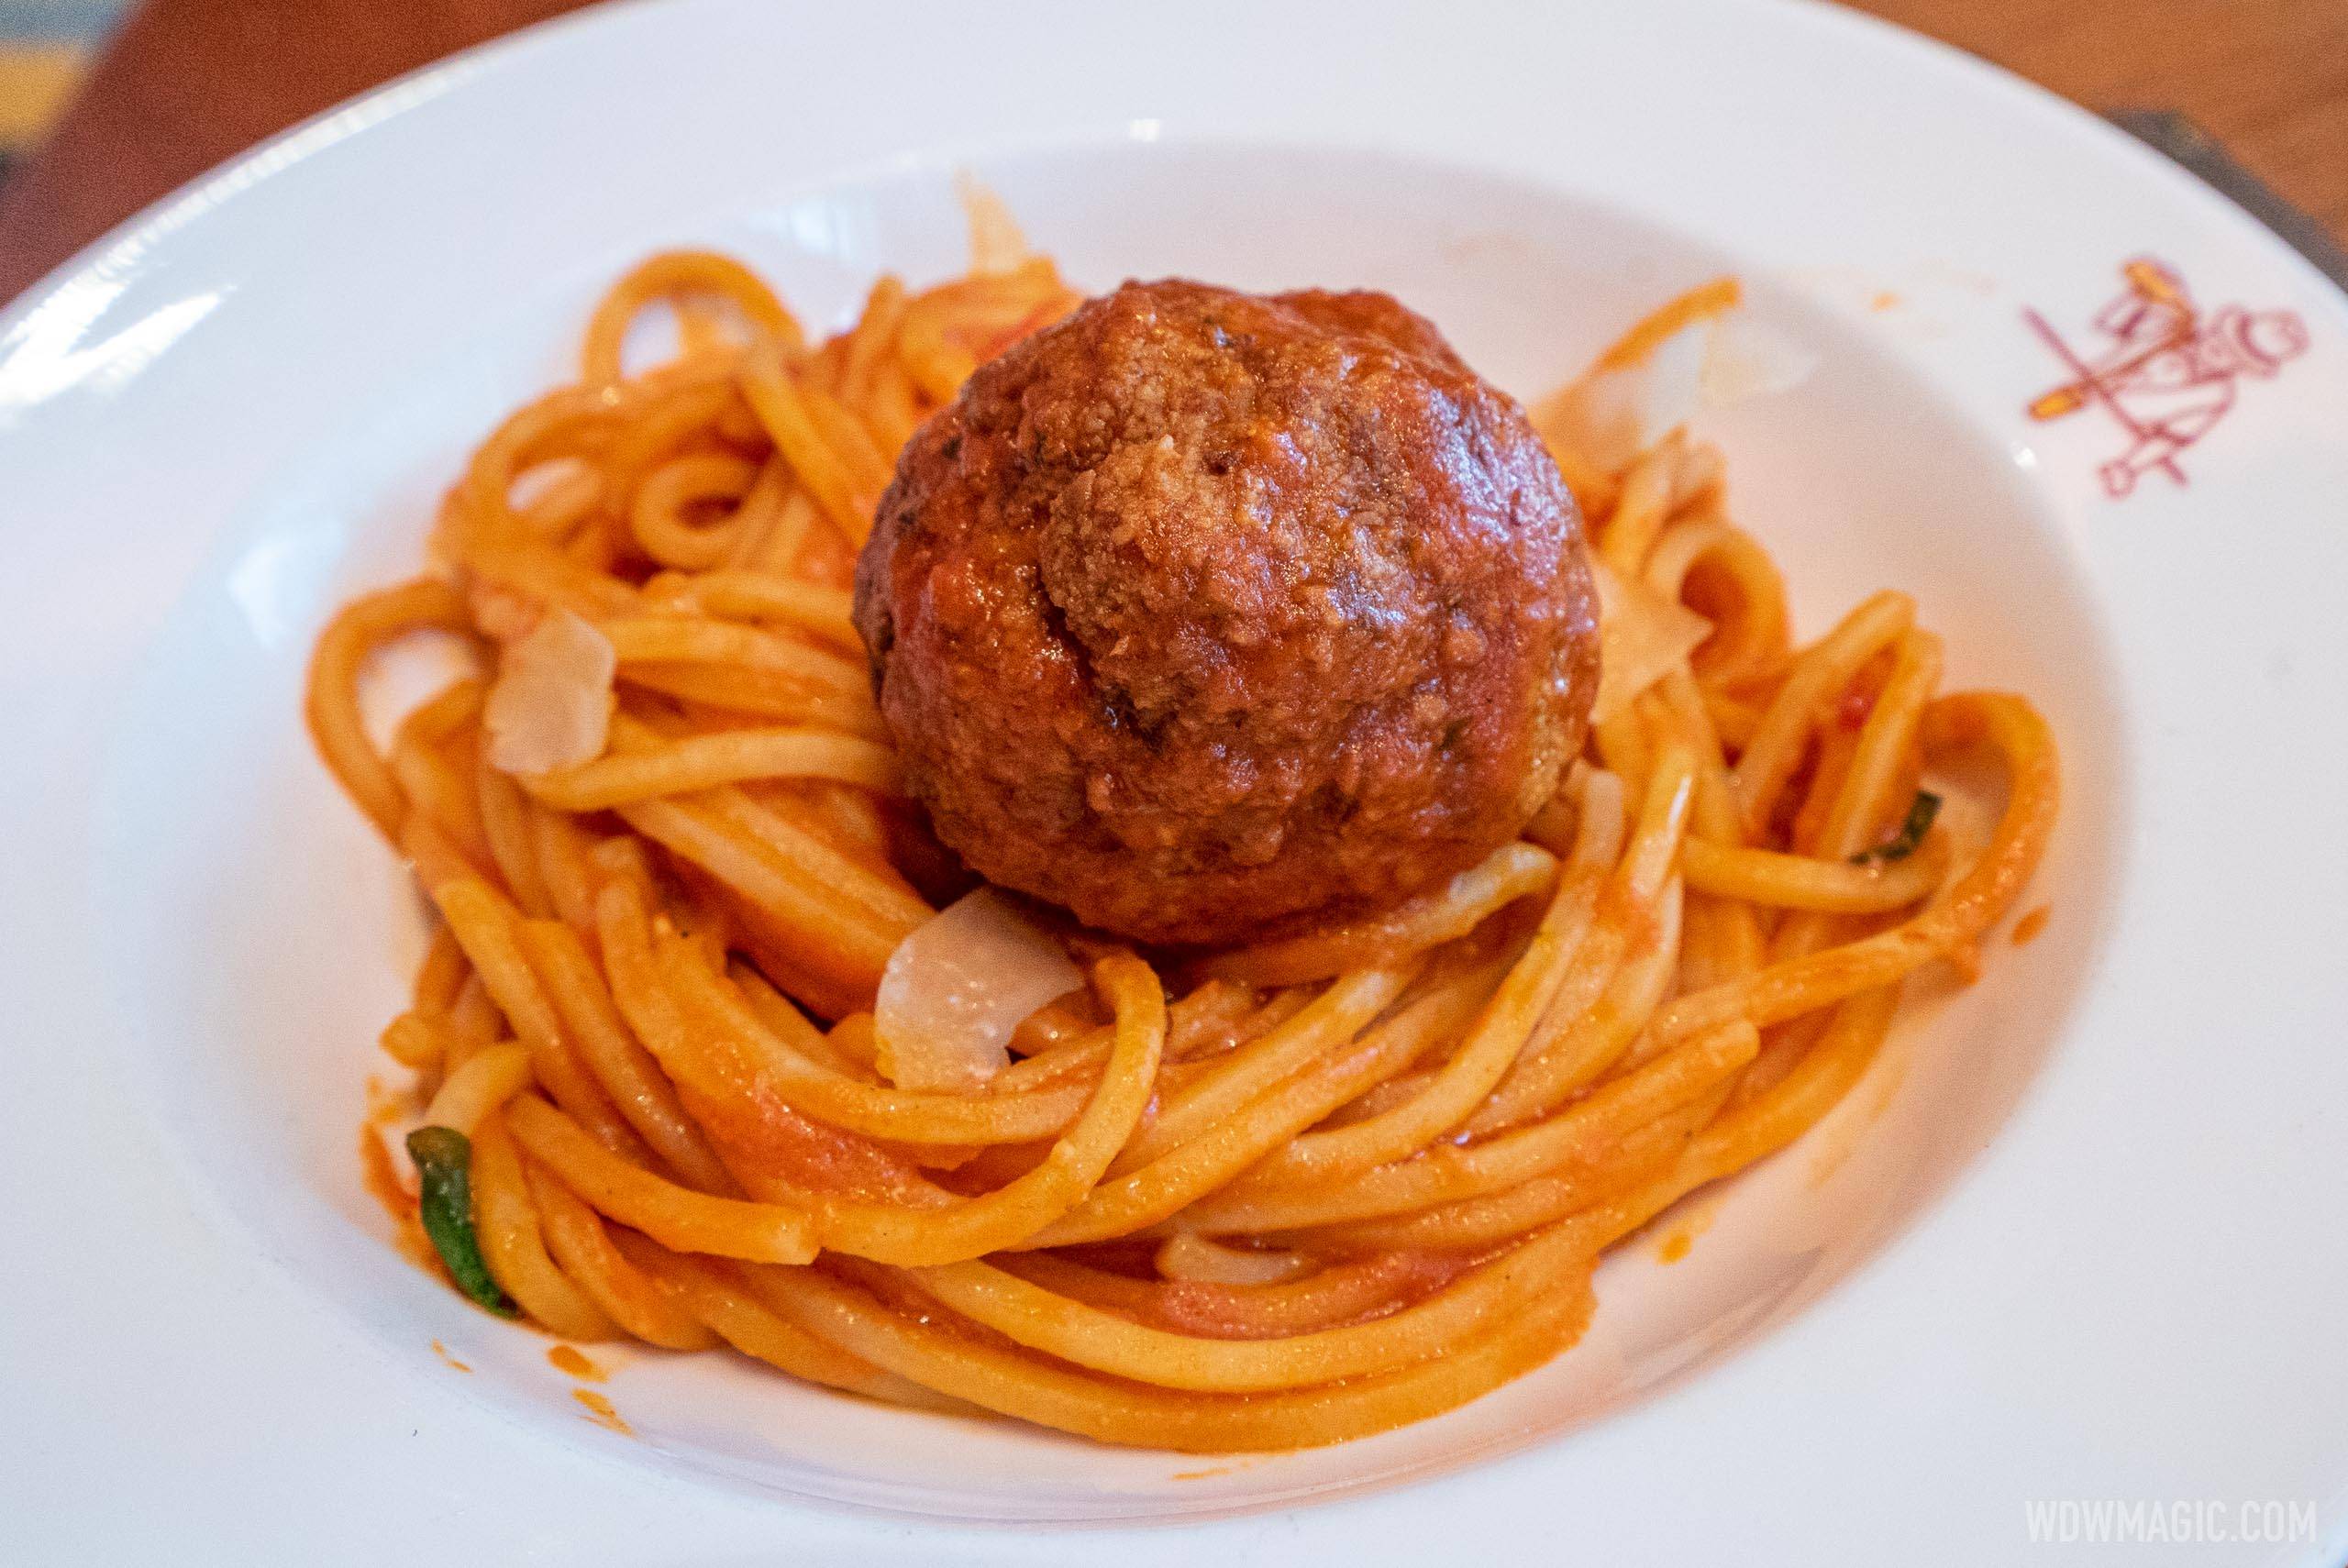 Maria and Enzo's food and drink - Spaghetti and Meatball